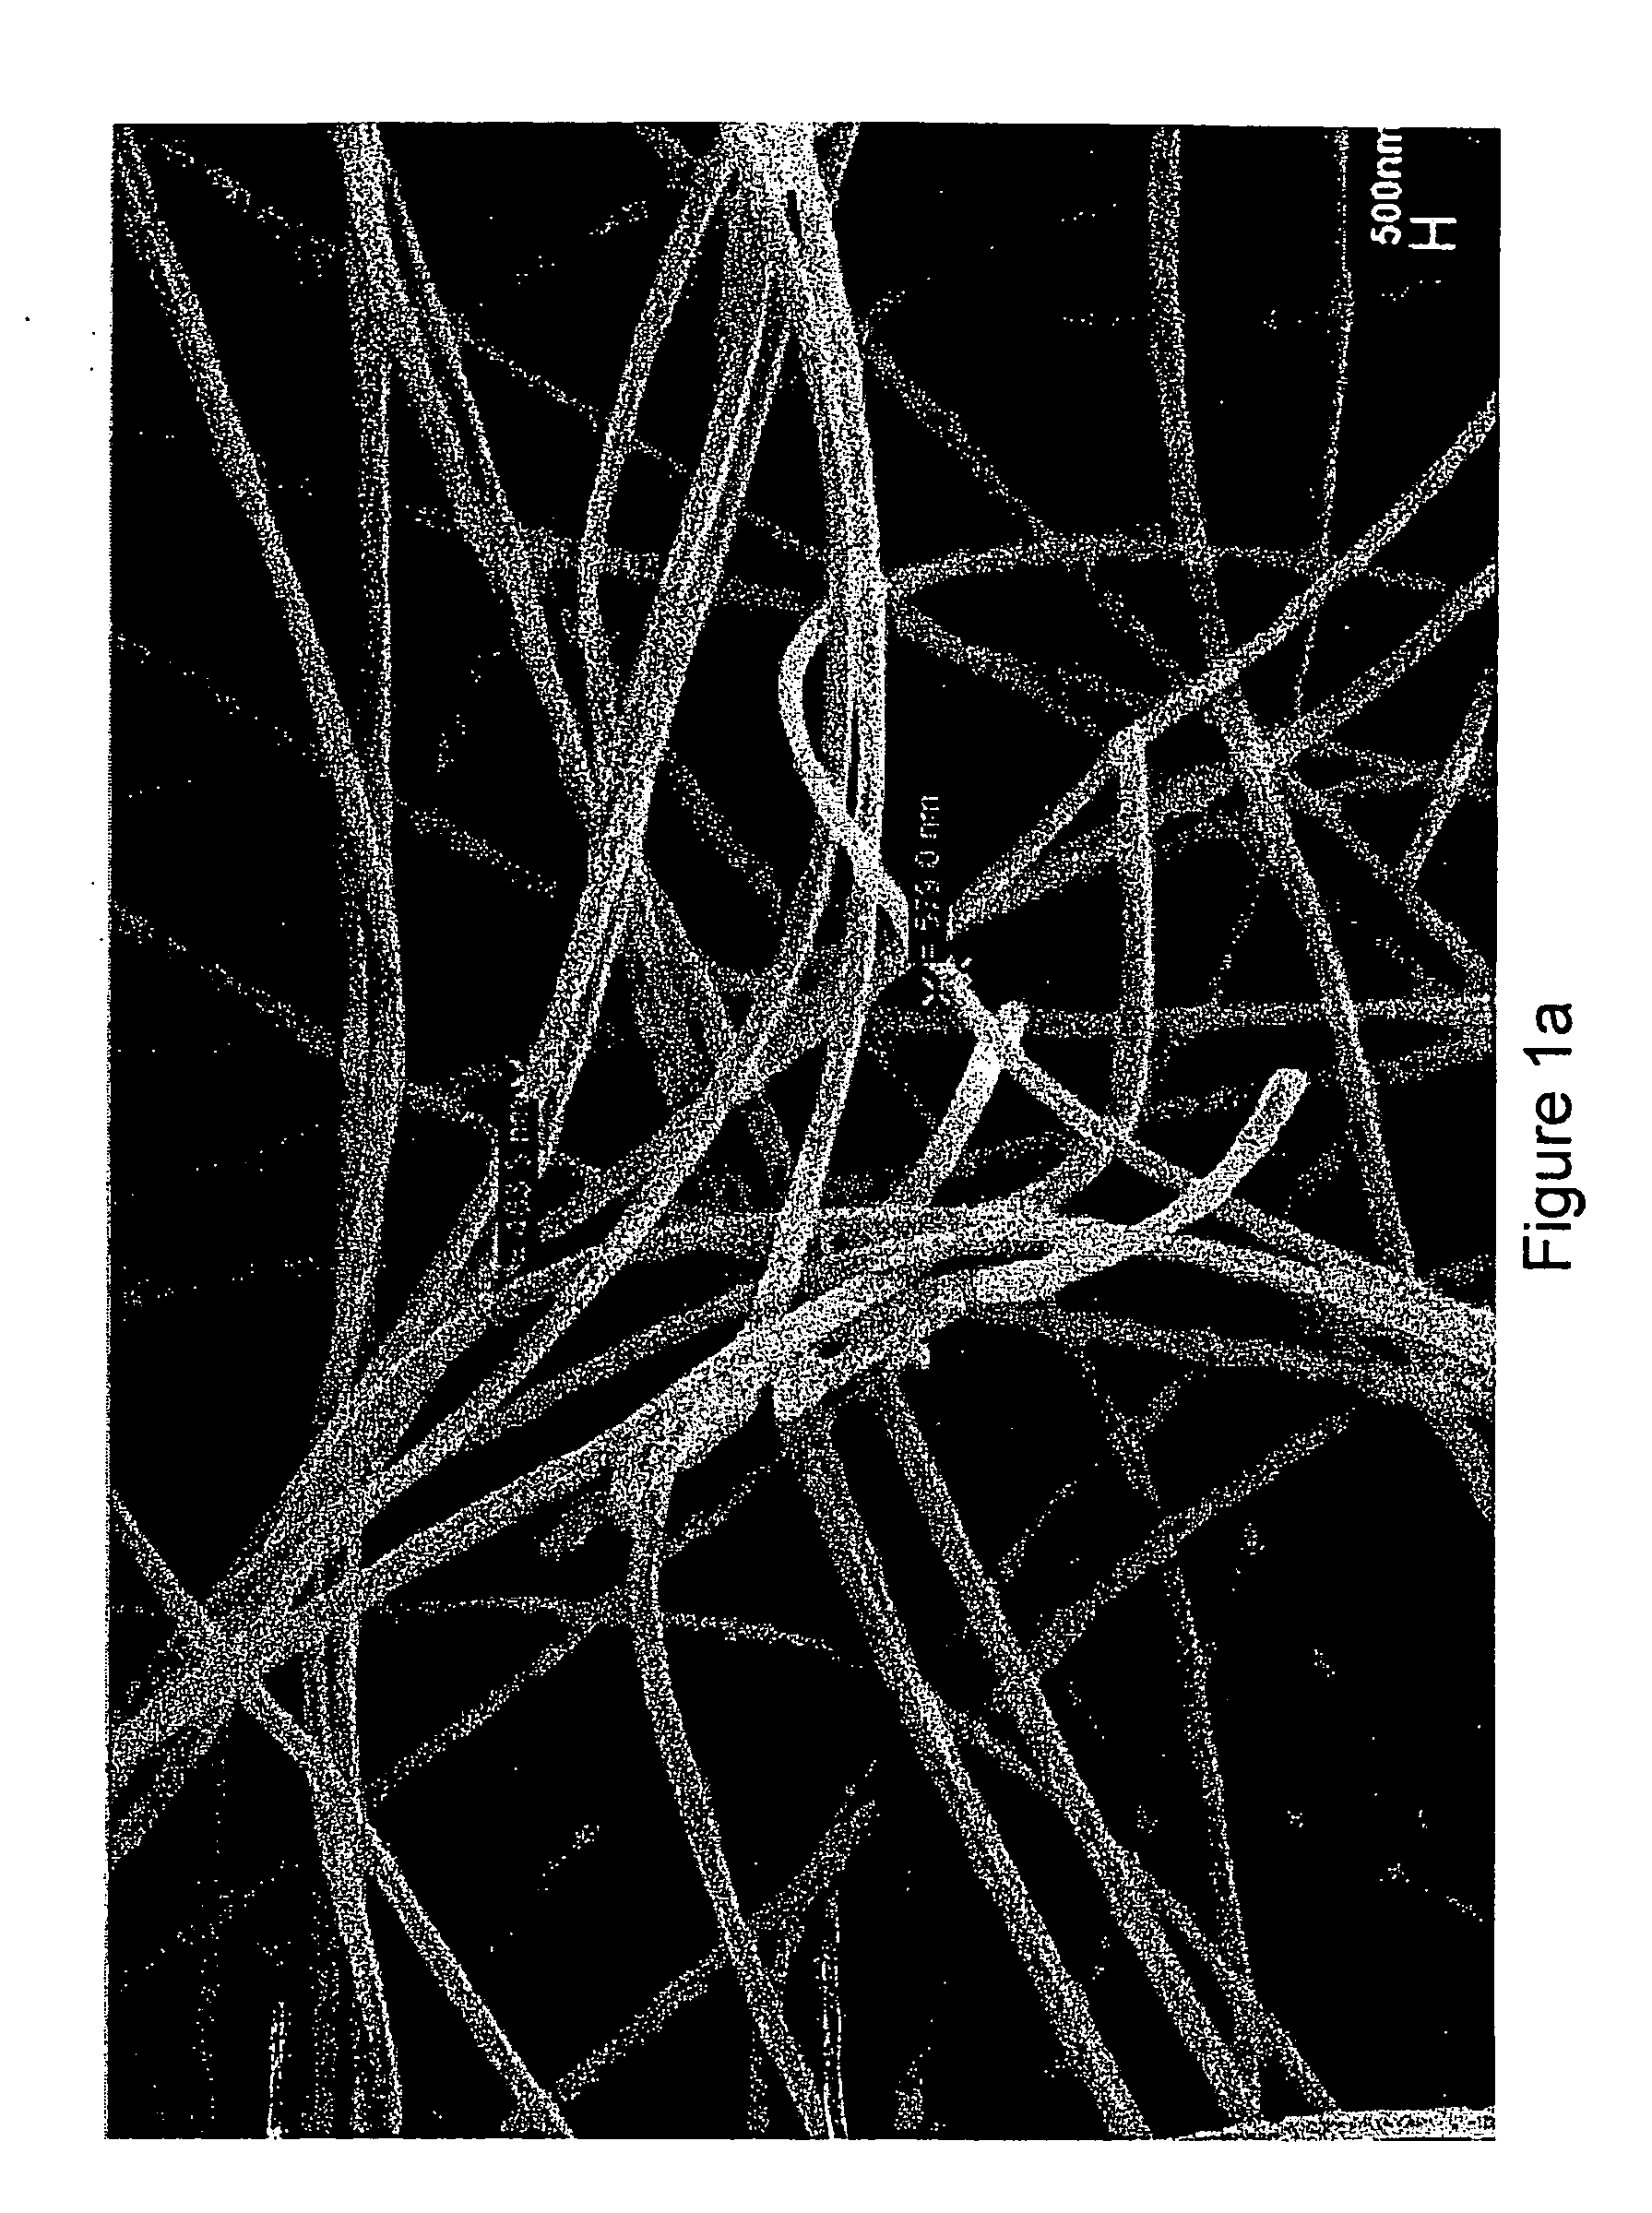 Fibers and methods relating thereto